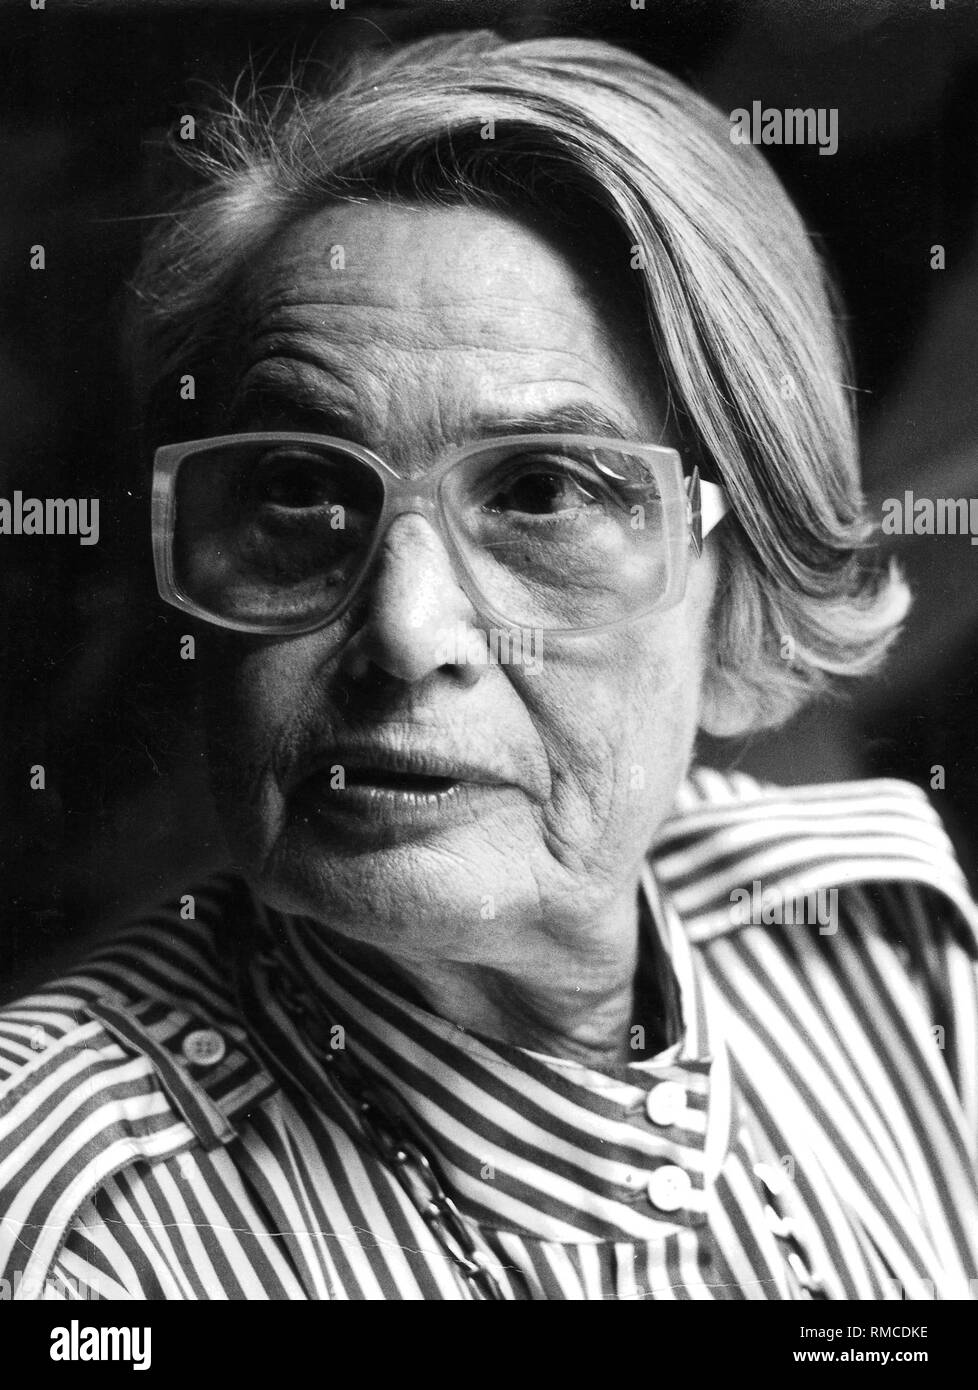 Elisabeth Noelle-Neumann, German pollster and founder of the first German opinion research institute, the Allensbach Institute, Bonn (1989). Stock Photo